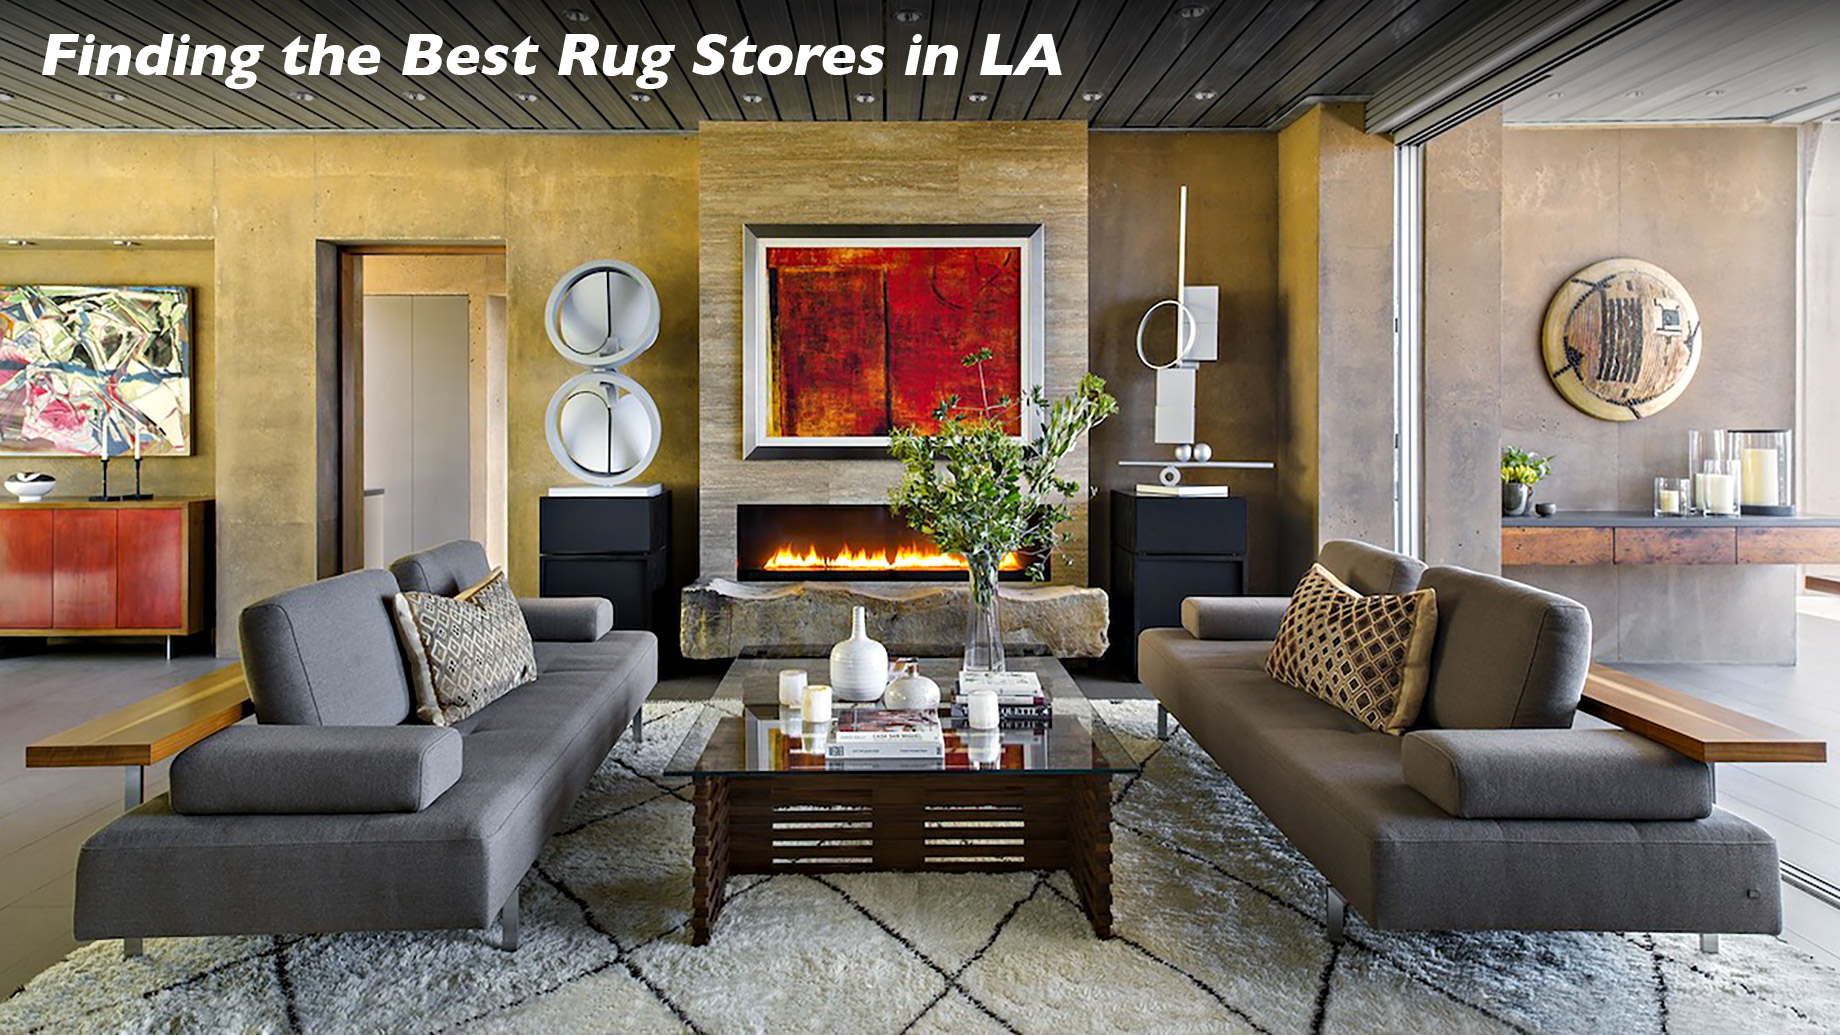 Finding the Best Rug Stores in LA